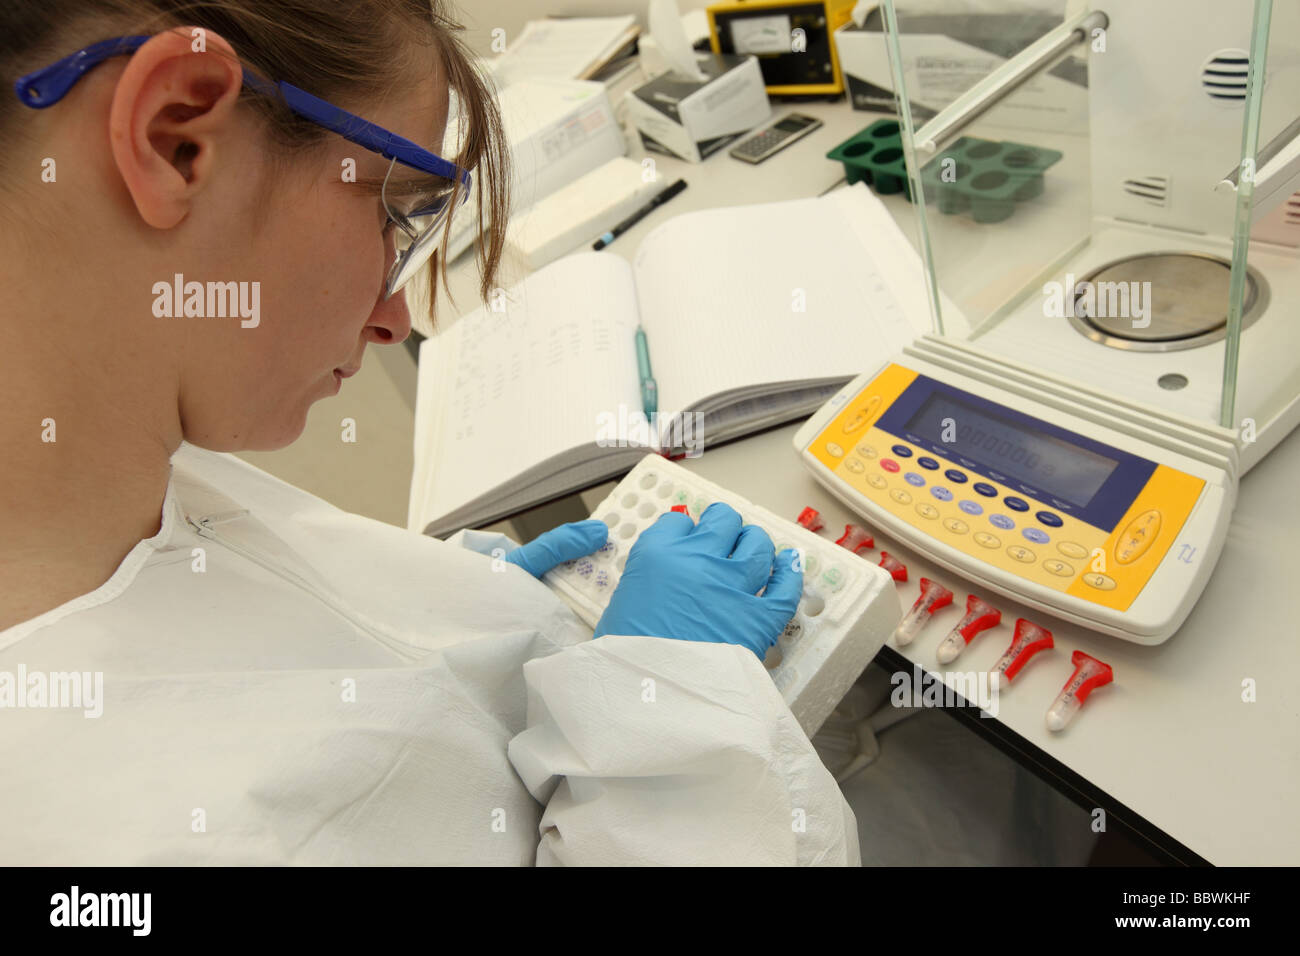 Scientist works in a Weighing Room of a Clean Laboratory on Climate Change Research. Stock Photo